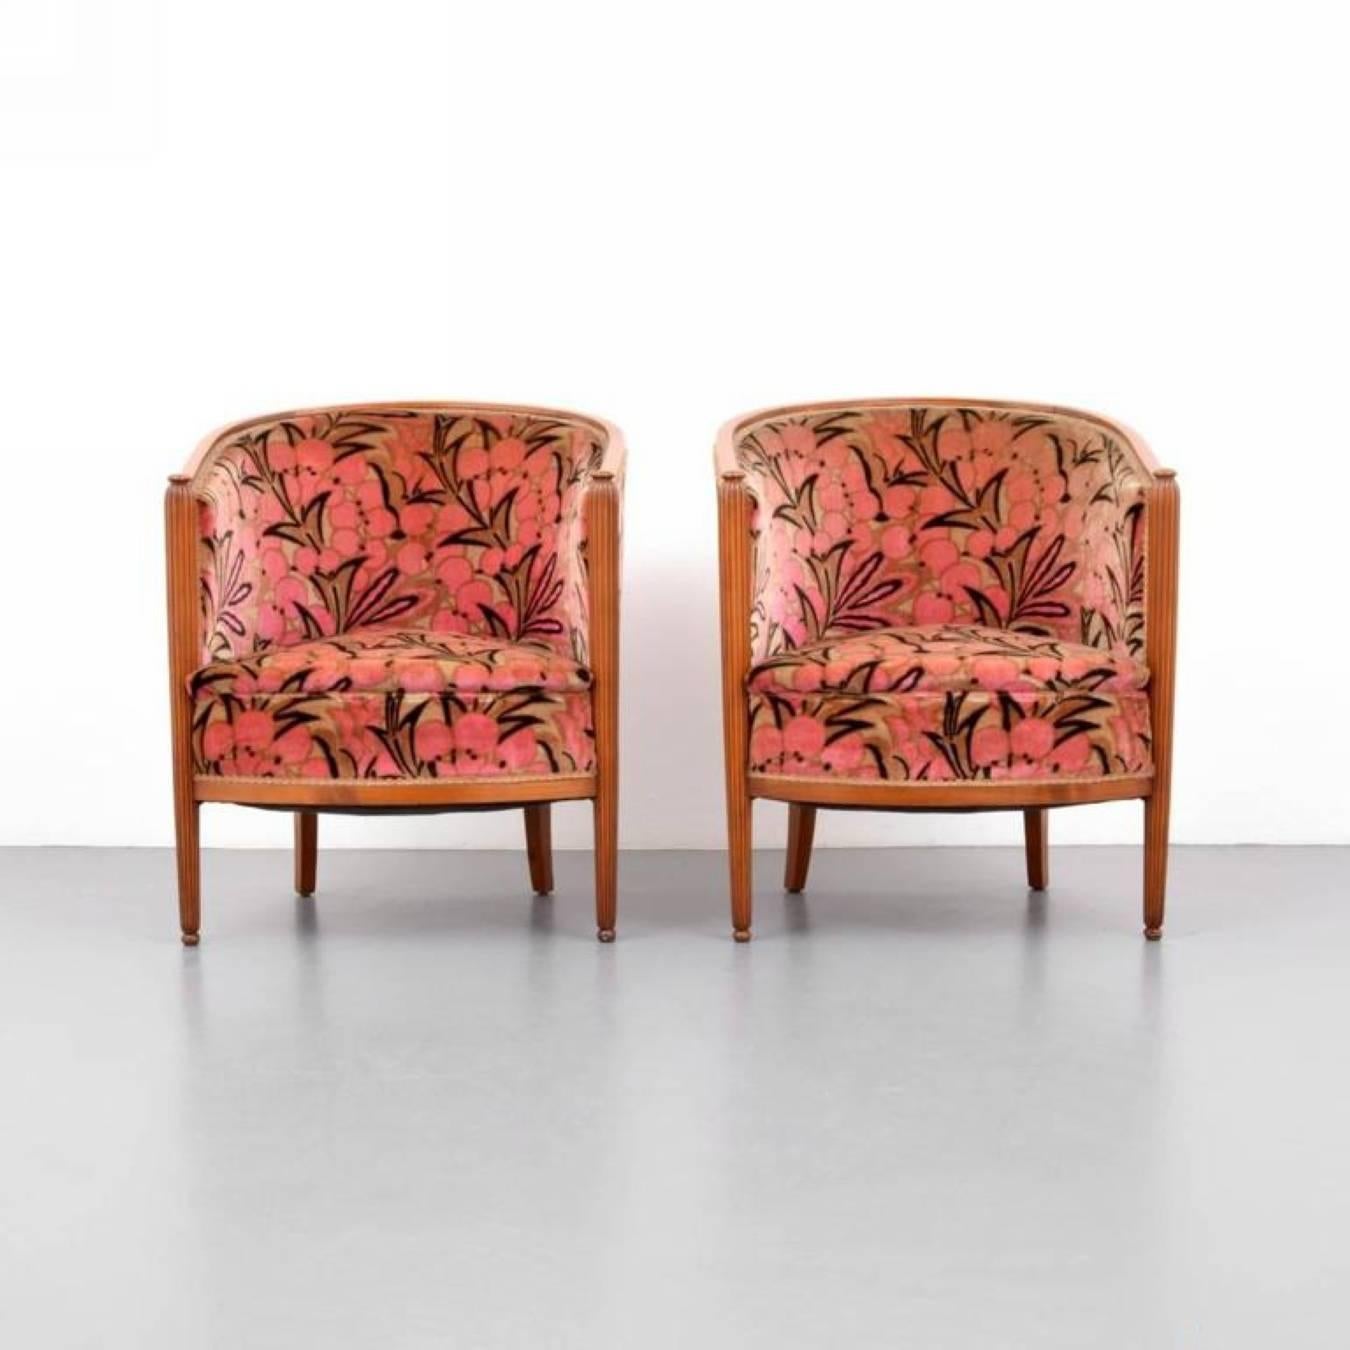 Unknown Pair of Art Deco Club Chairs, Barbra Streisand Collection